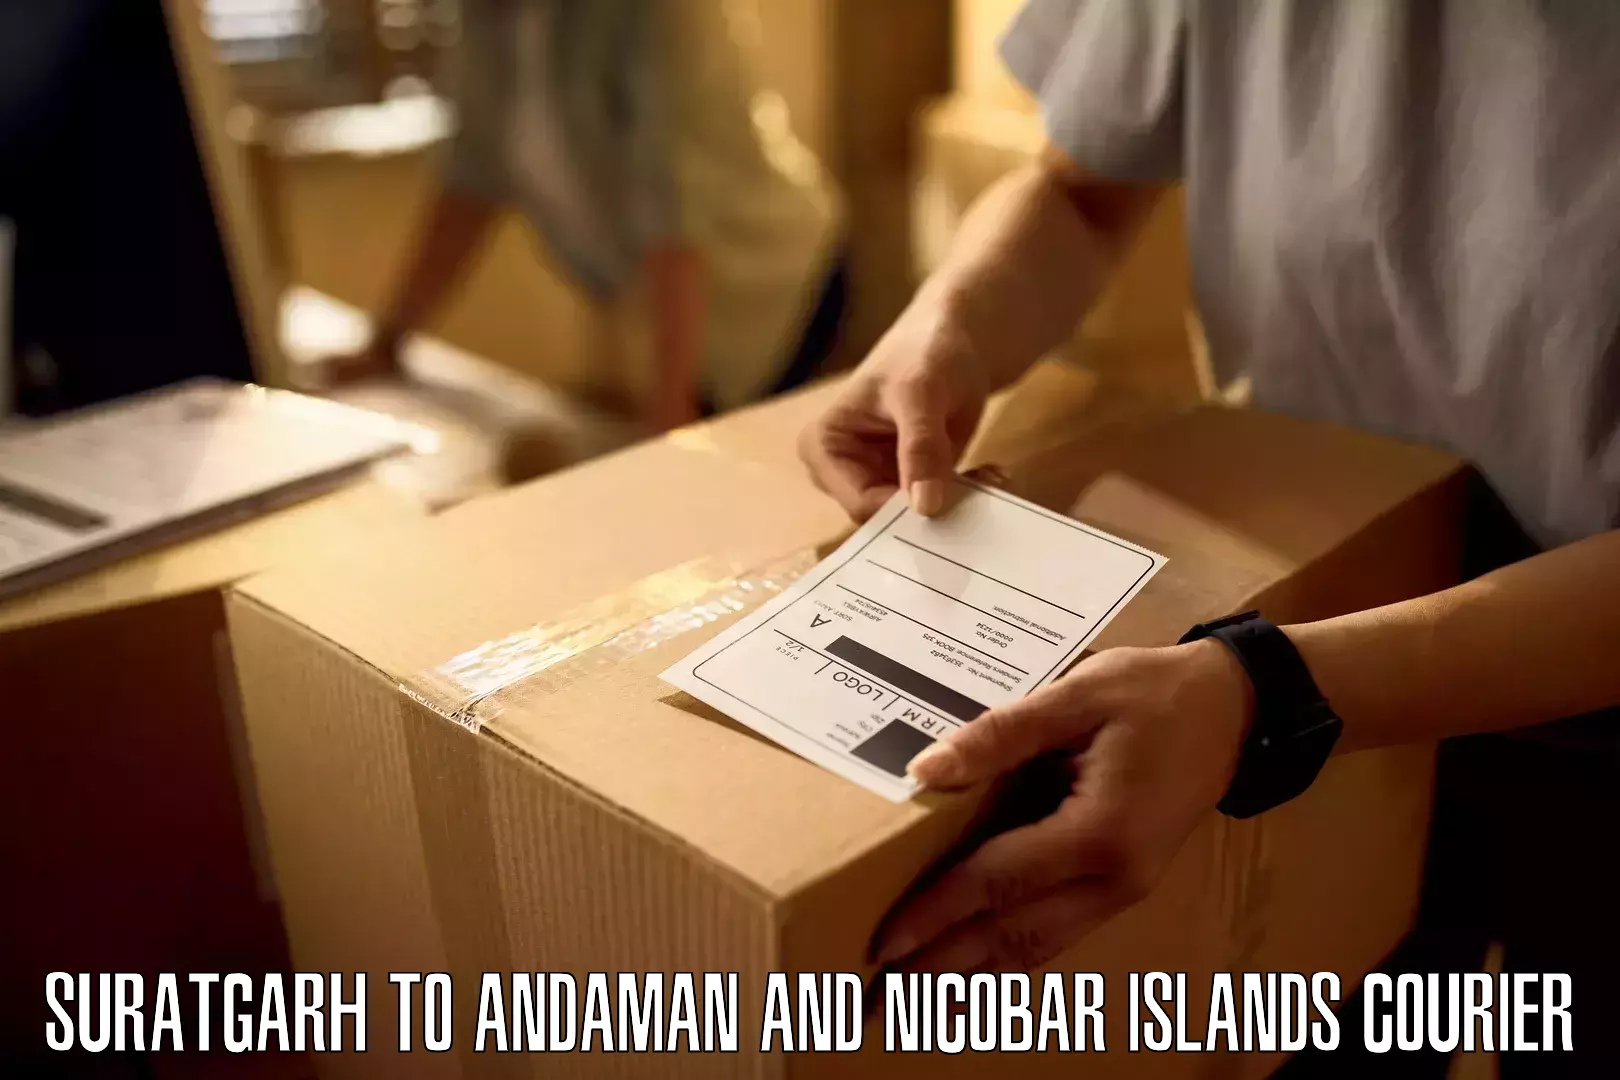 Subscription-based courier Suratgarh to Andaman and Nicobar Islands